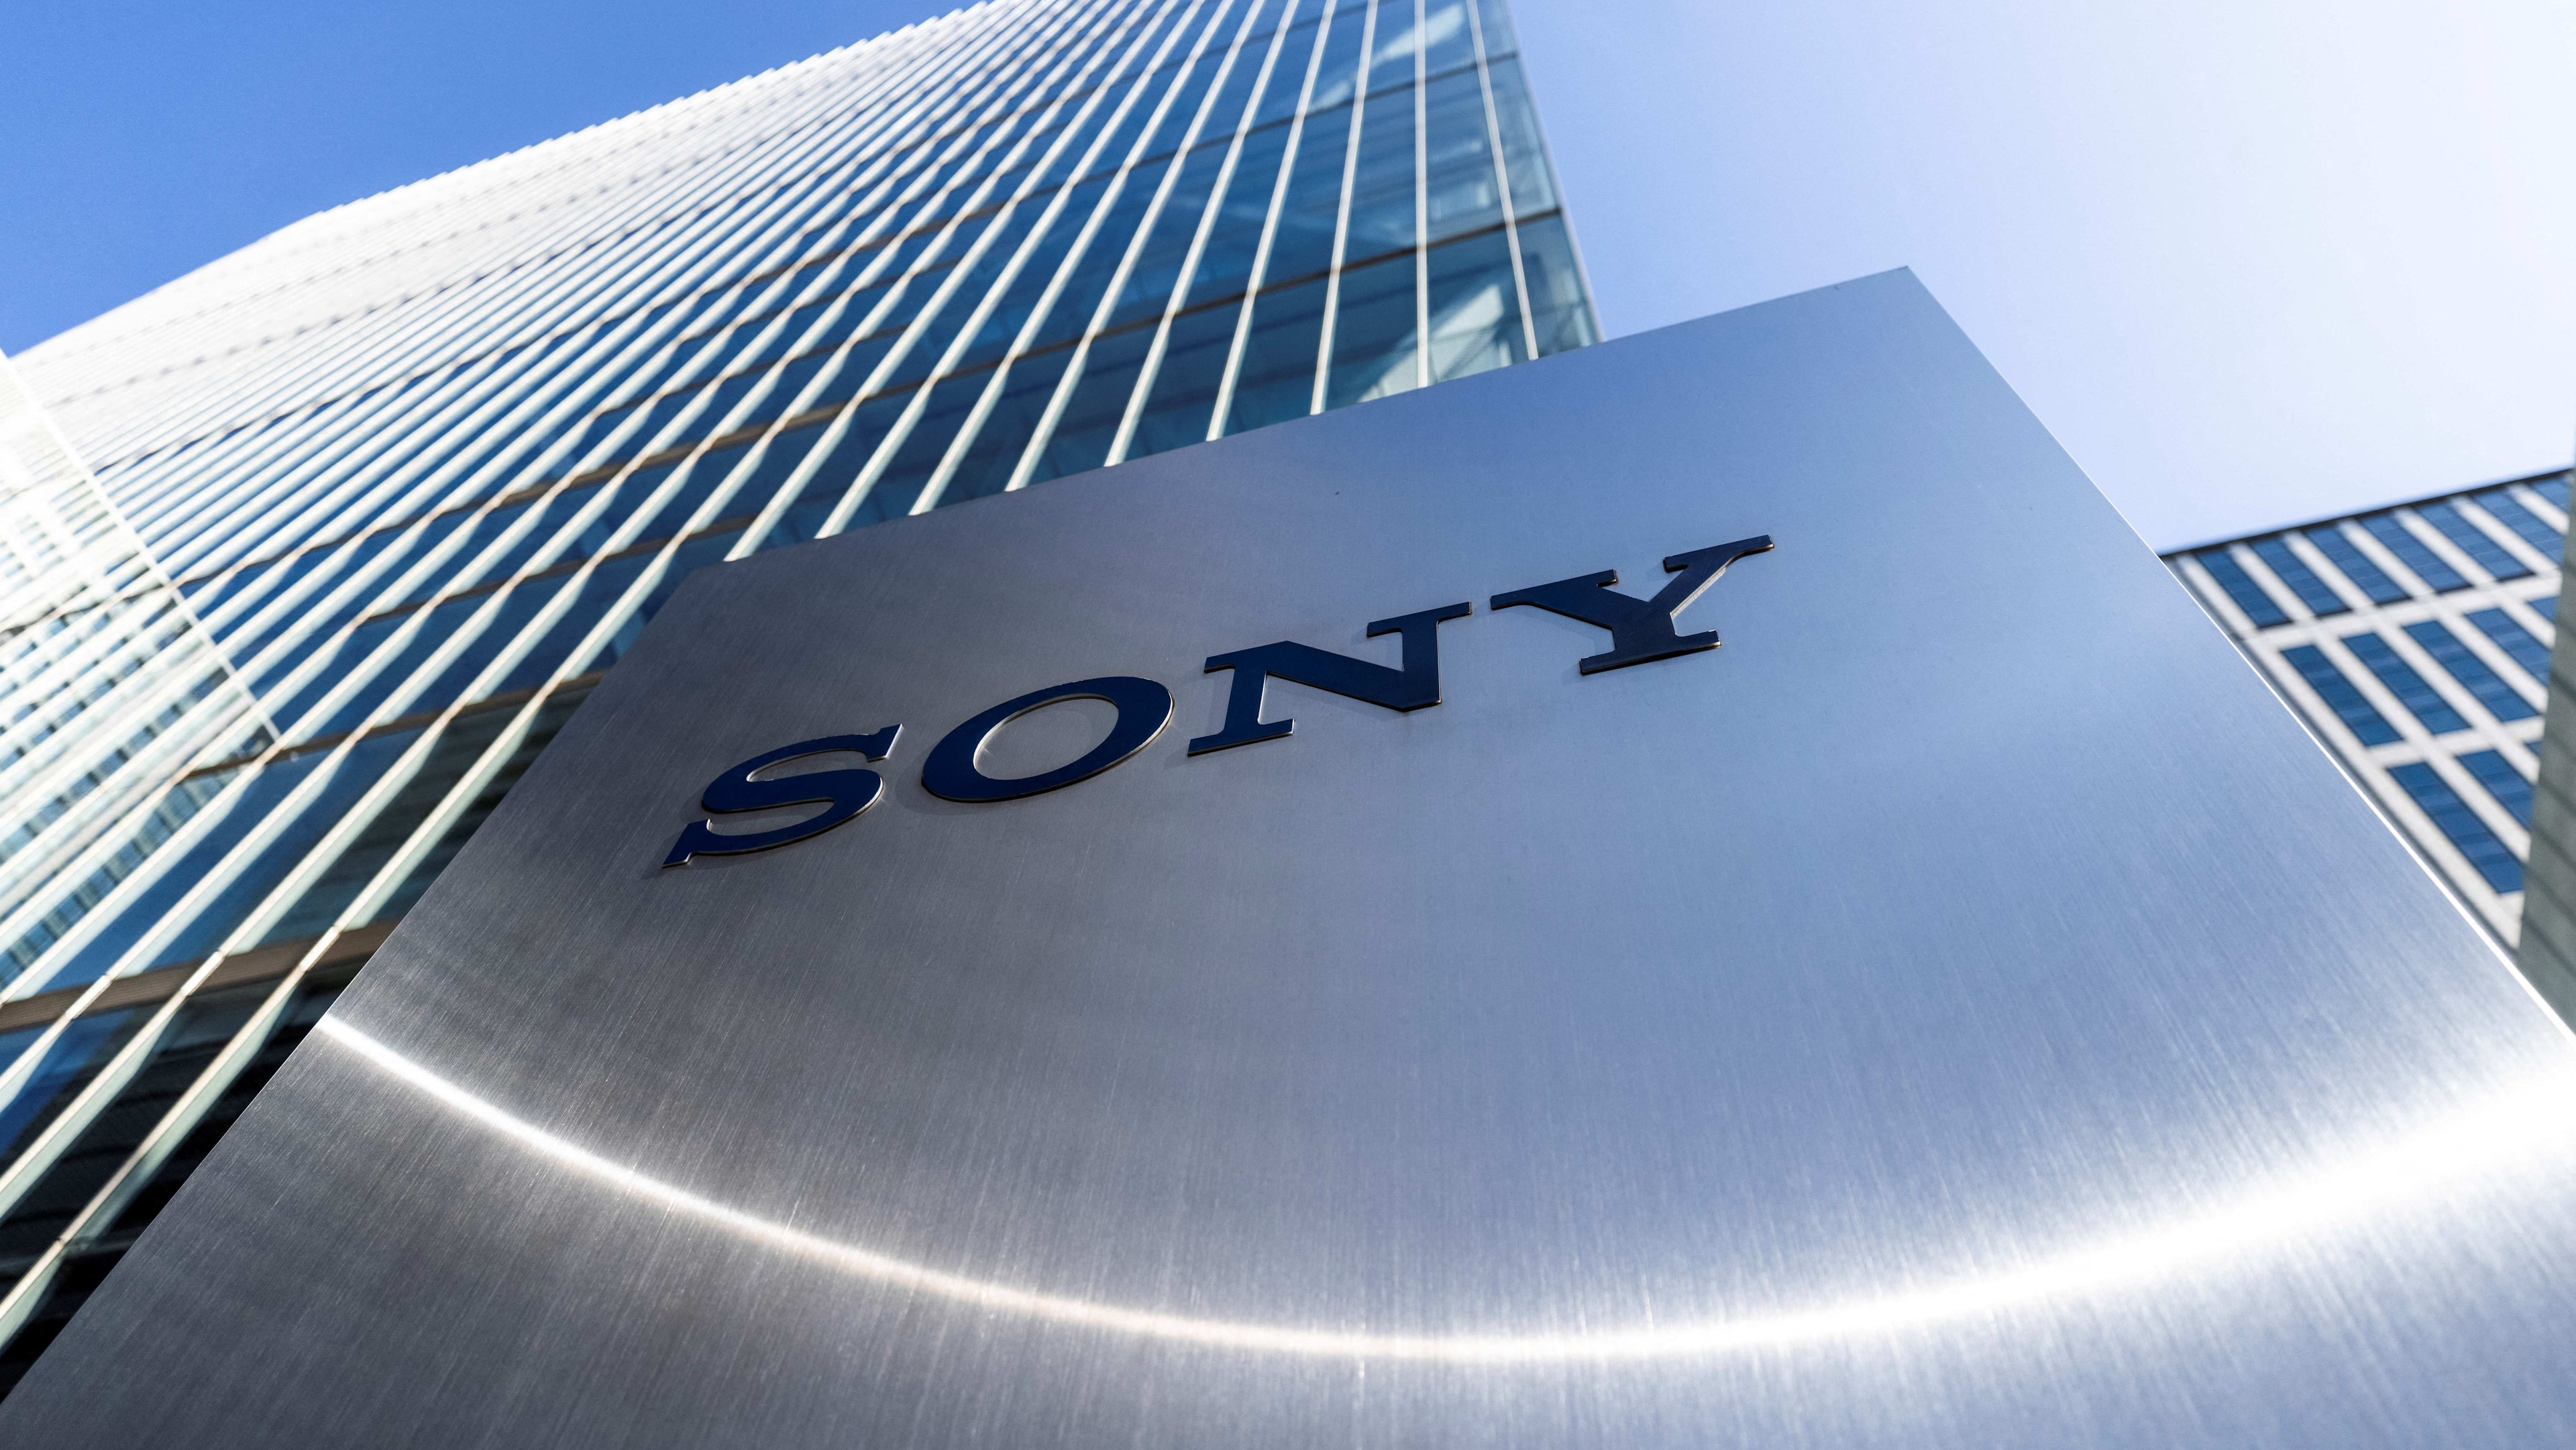  Ransomware group claims to have hacked 'all of Sony systems,' Sony is investigating 